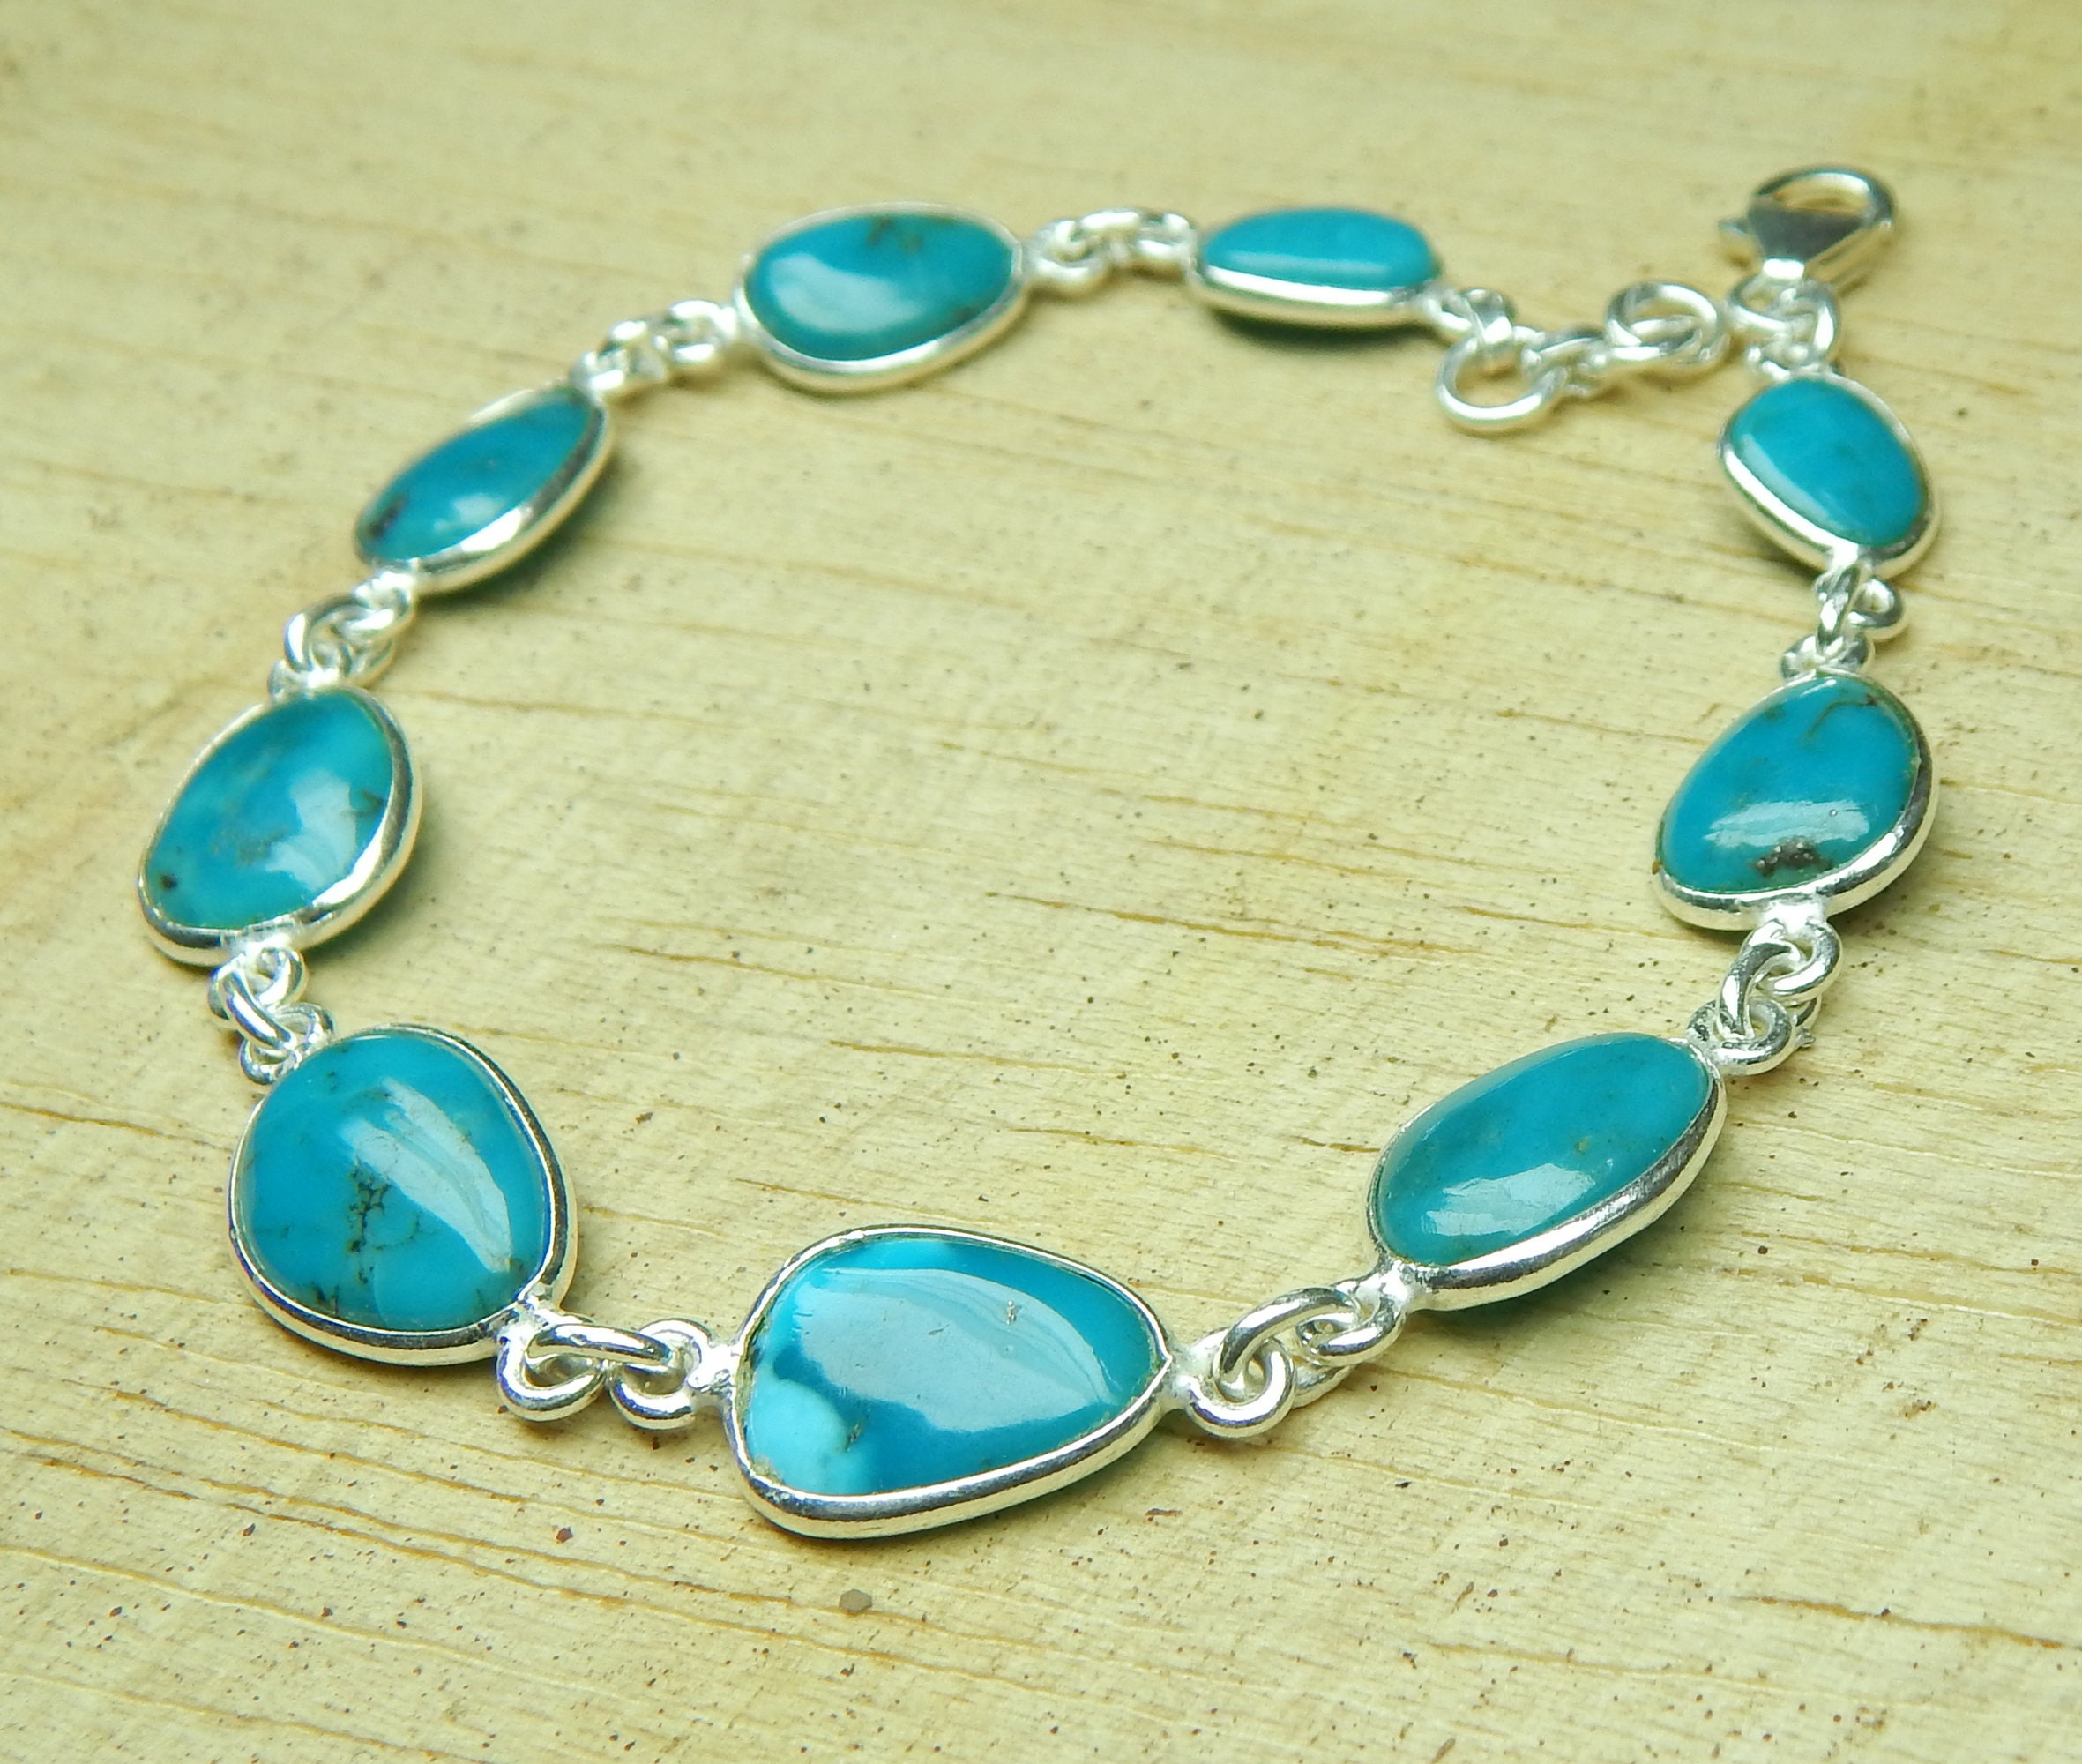 American Turquoise Bracelet Natural American Turquoise Etsy